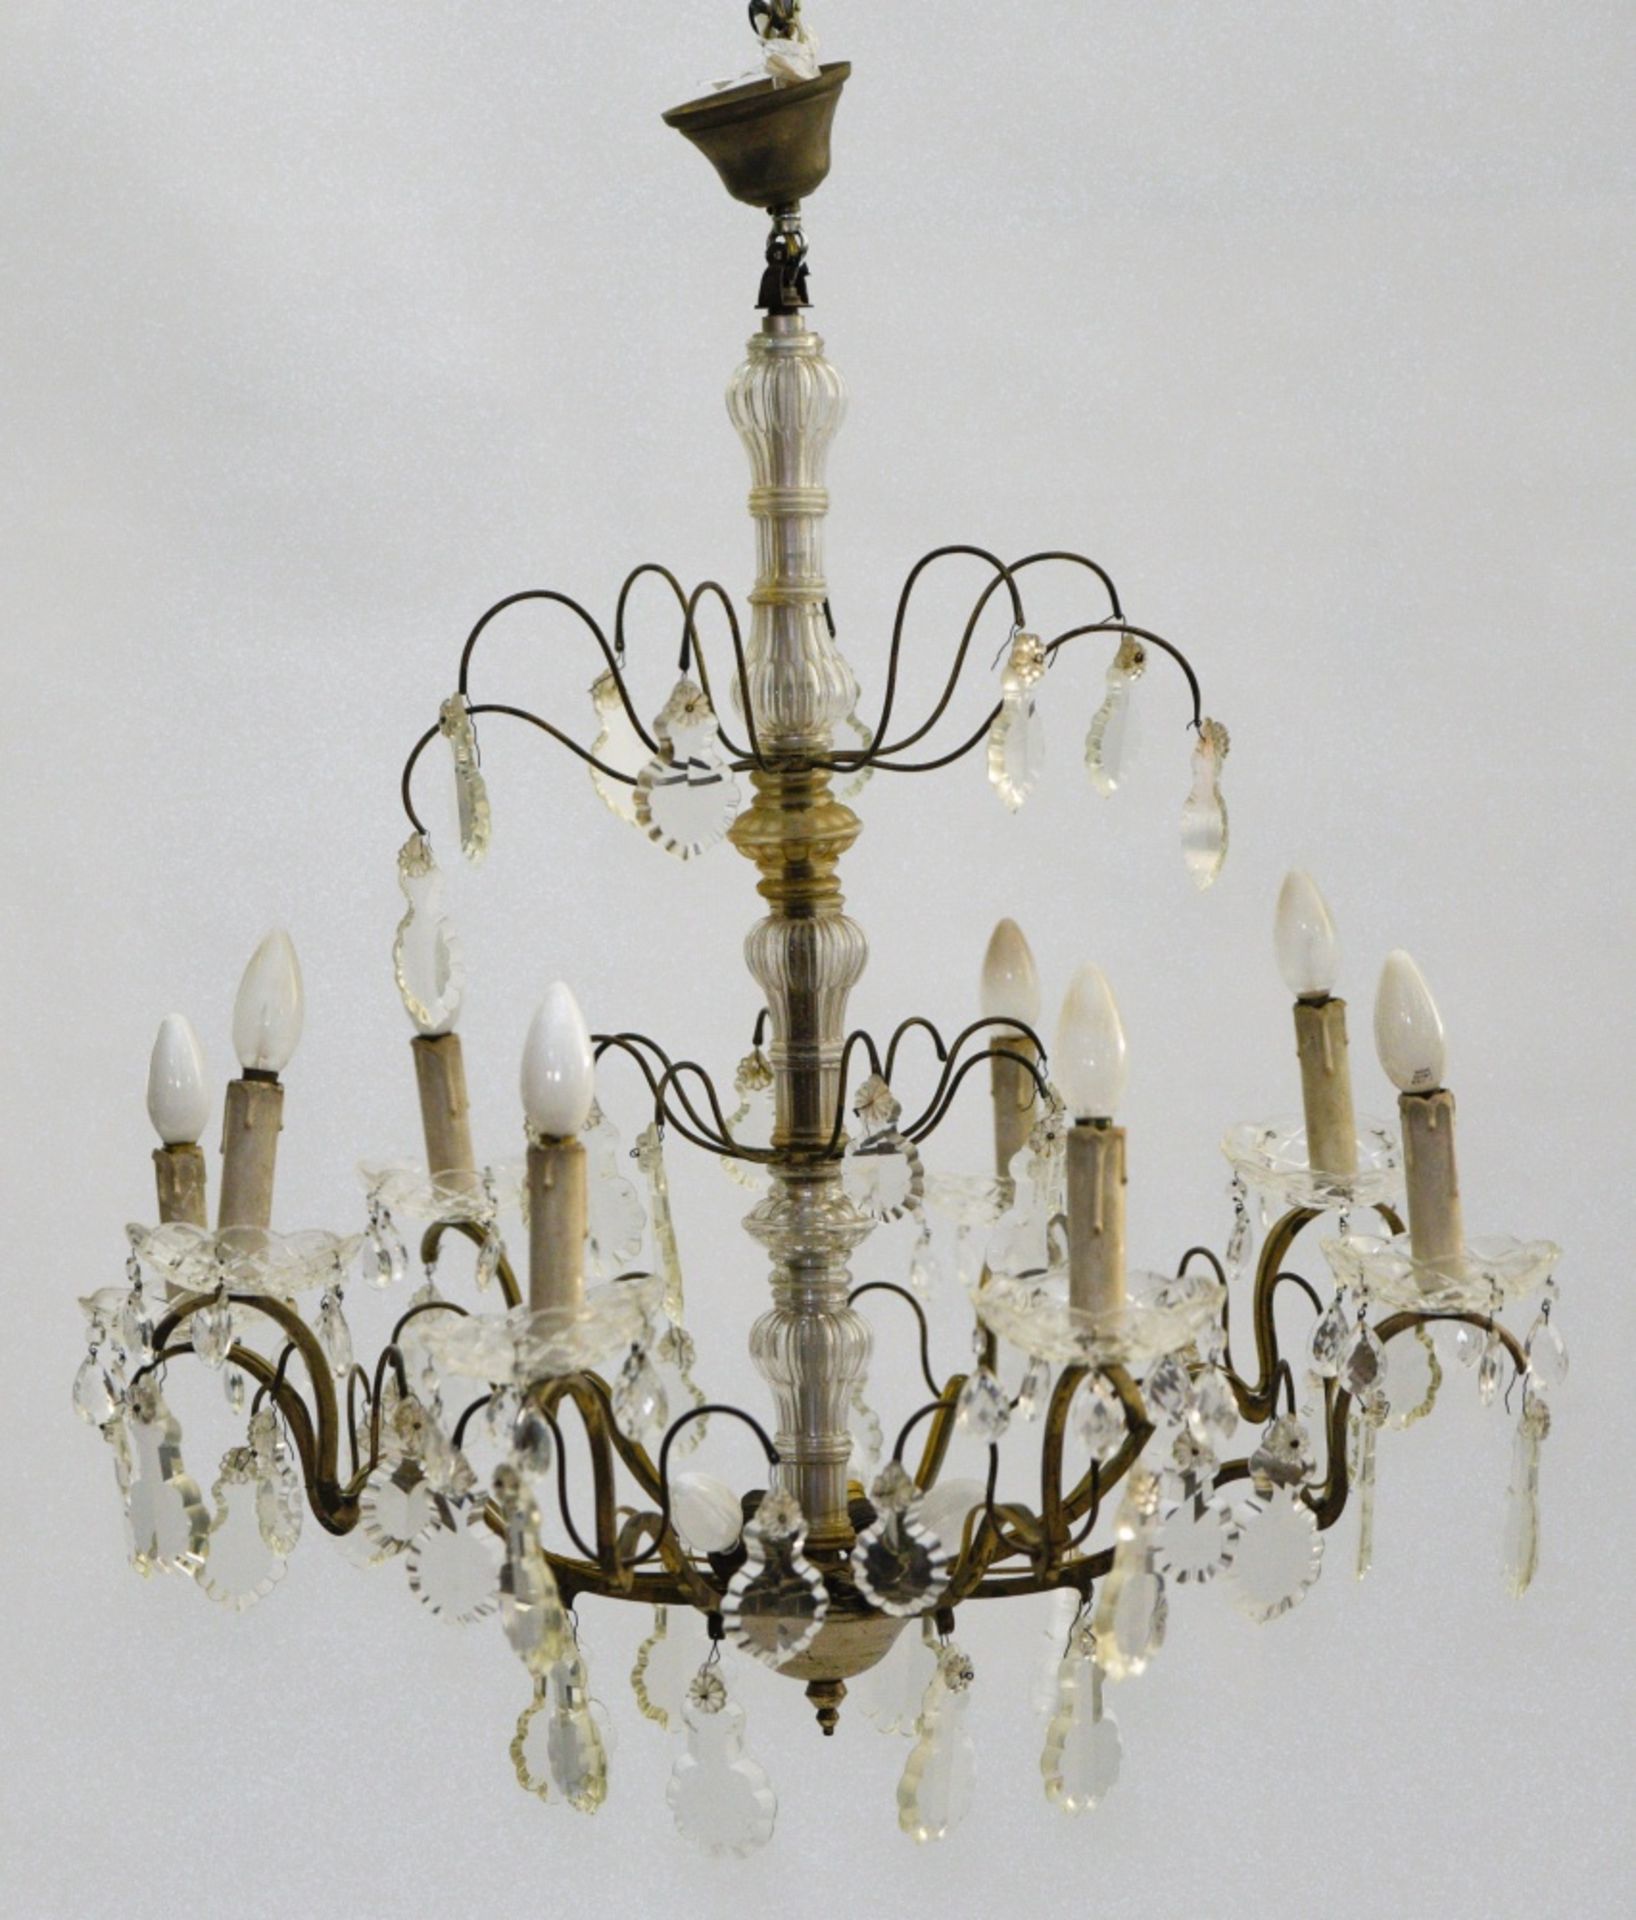 20th century work Chandelier with glass teardrops, Bronze with eight arms and twelve lights, glass